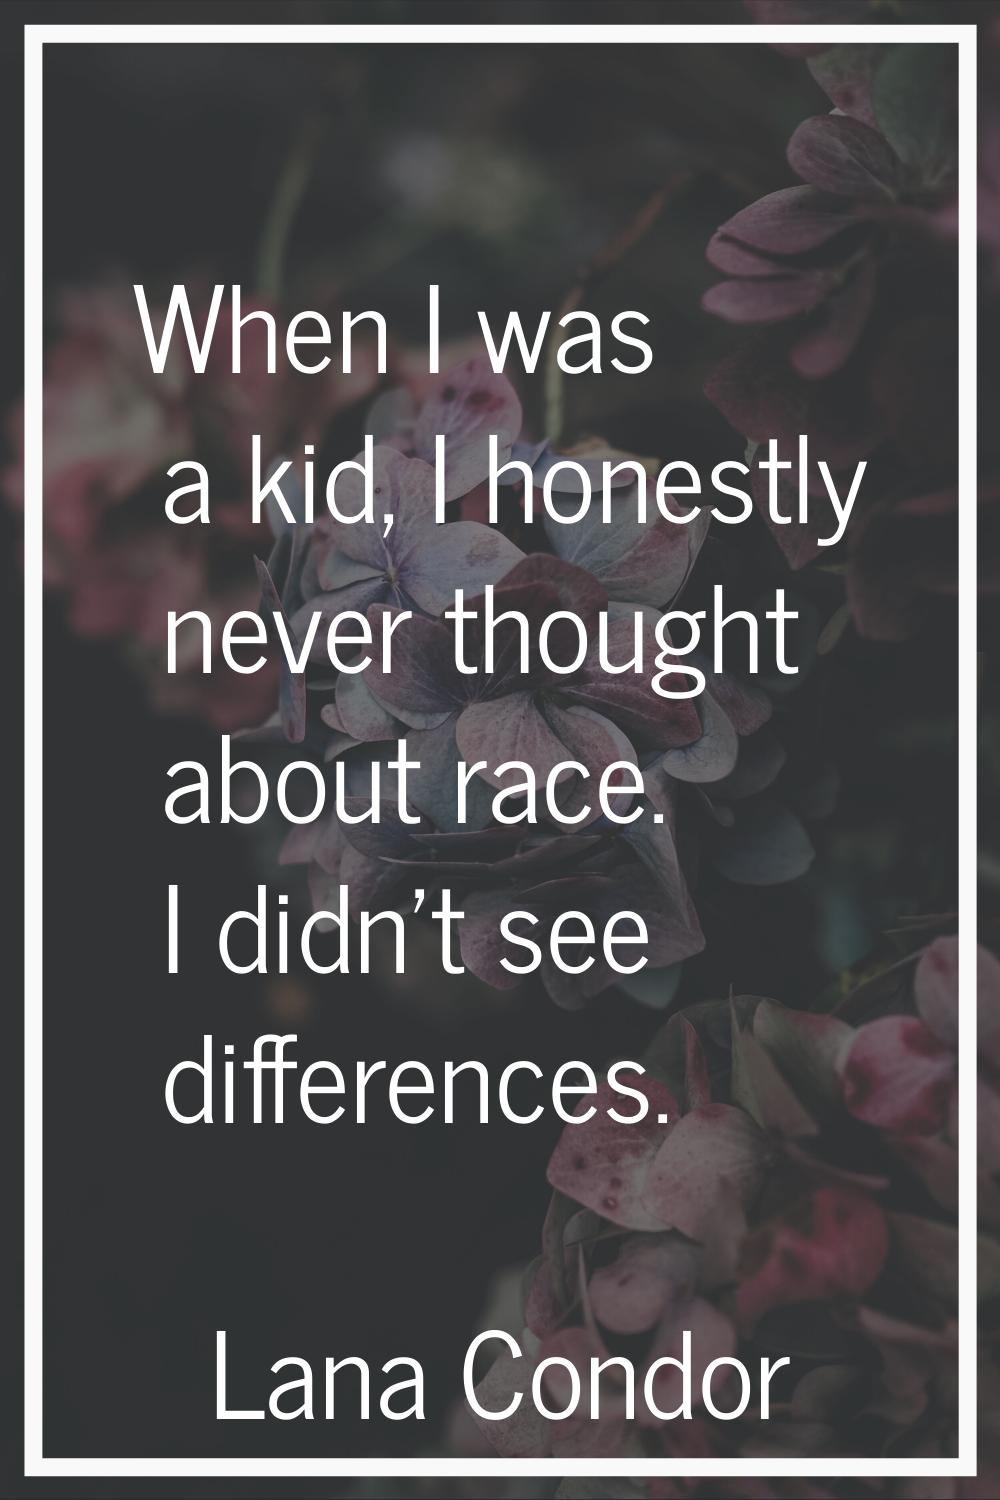 When I was a kid, I honestly never thought about race. I didn't see differences.